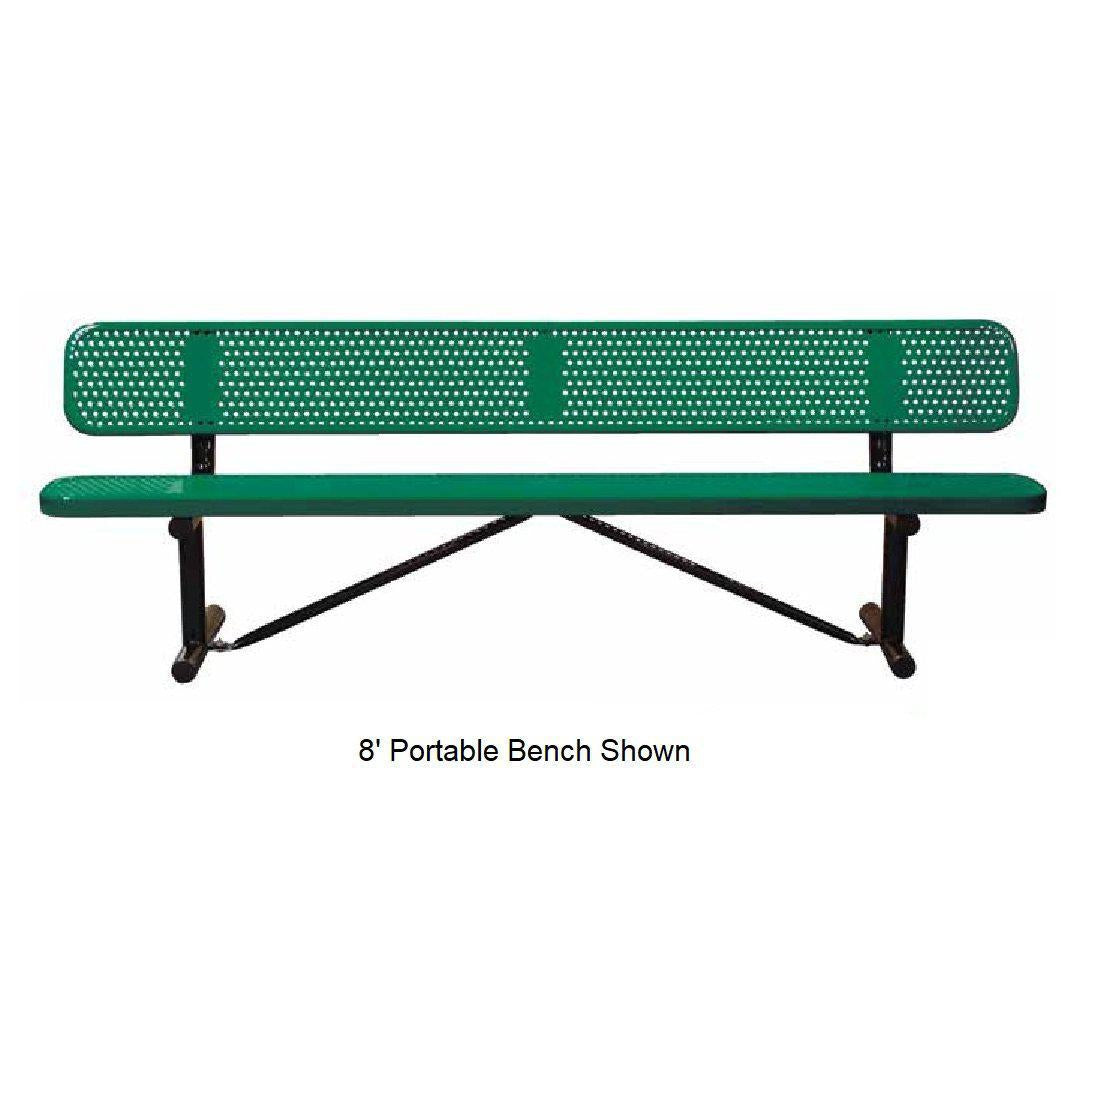 15’ Standard Perforated Bench With Back, Portable